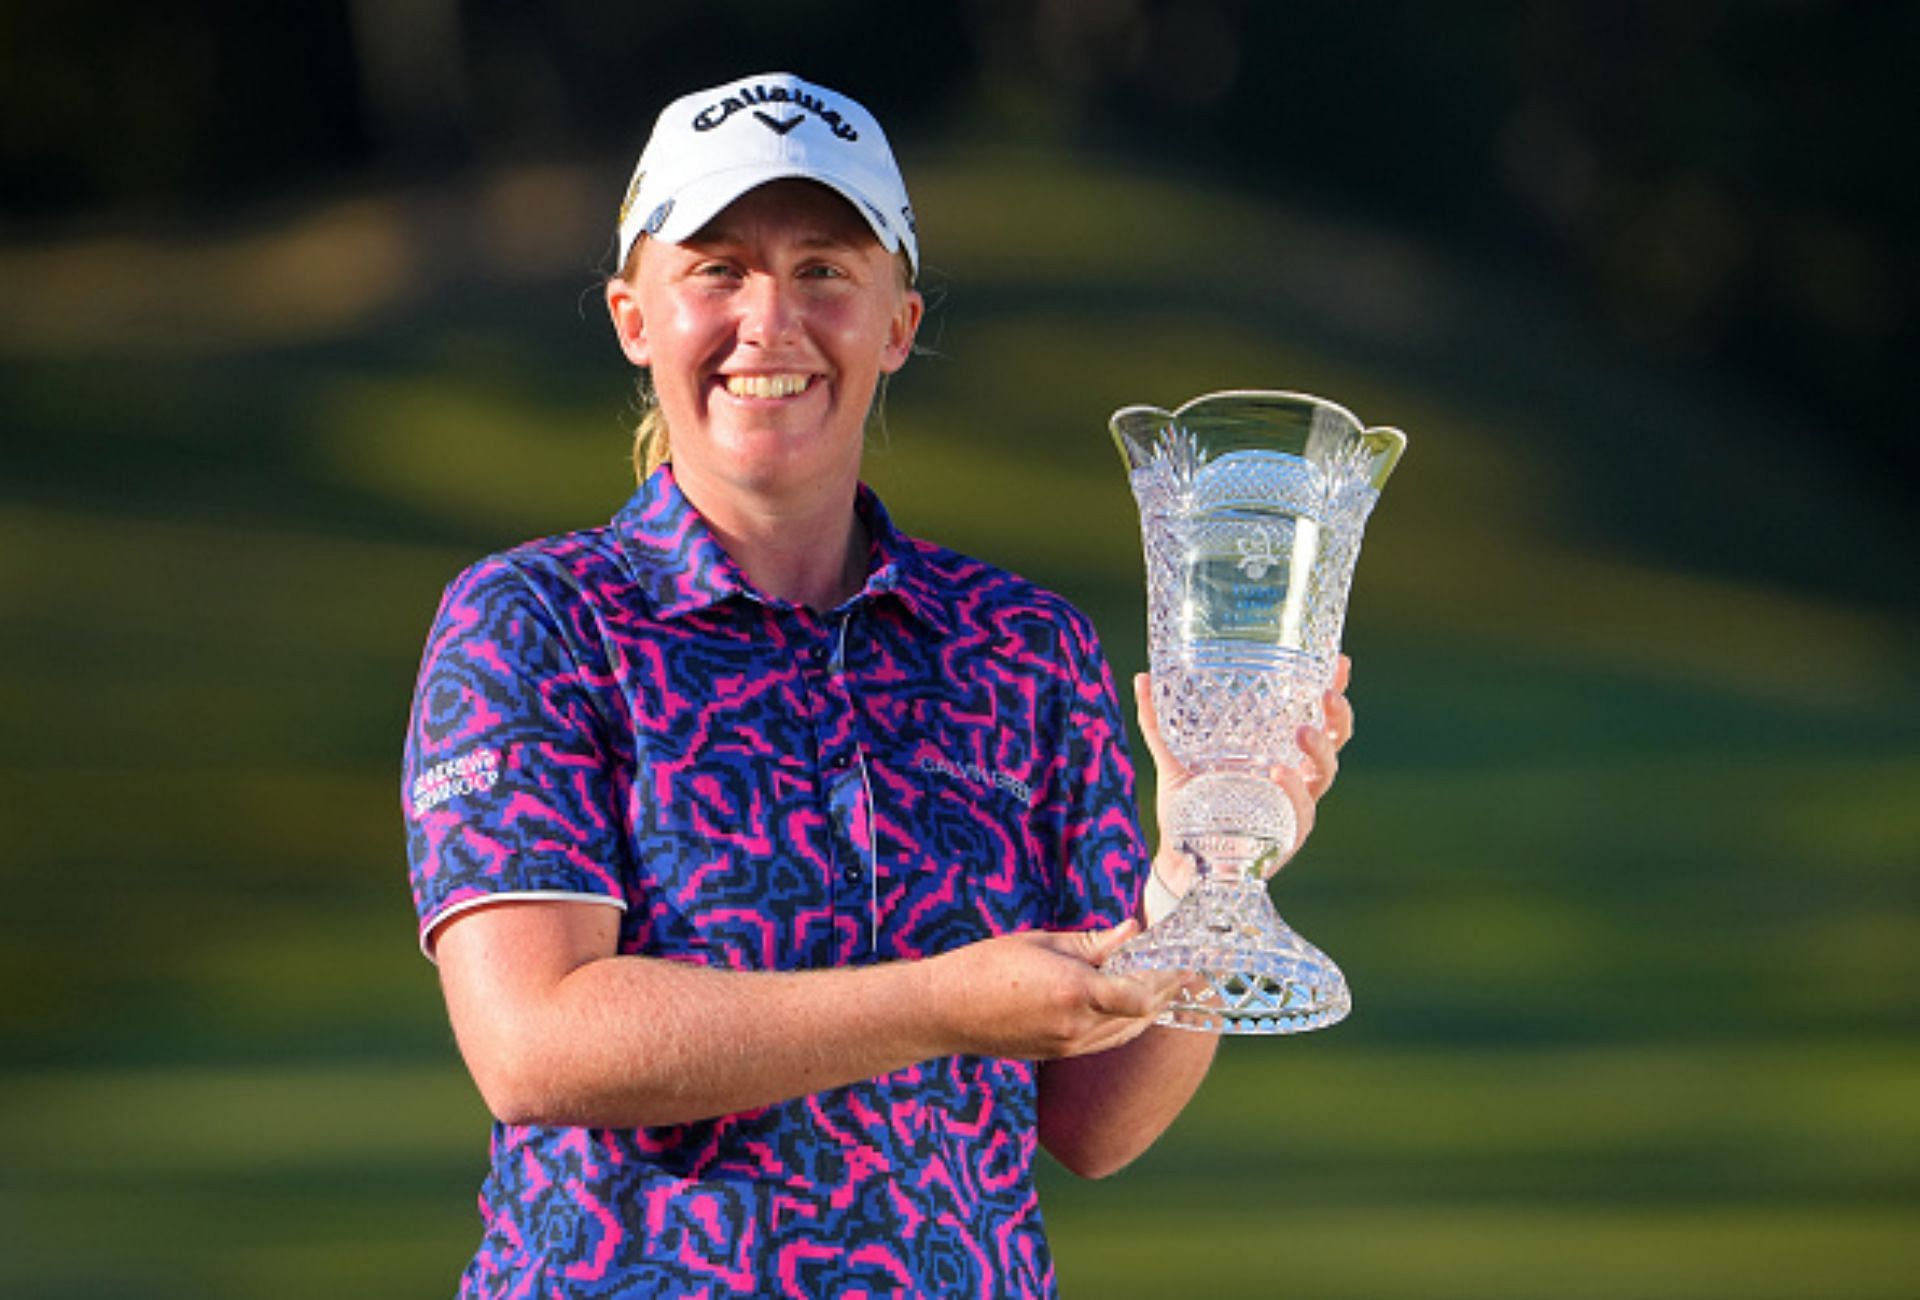 Gemma Dryburgh will be at the 2023 TOTO Japan Classic as the defending champion (Image via Getty).